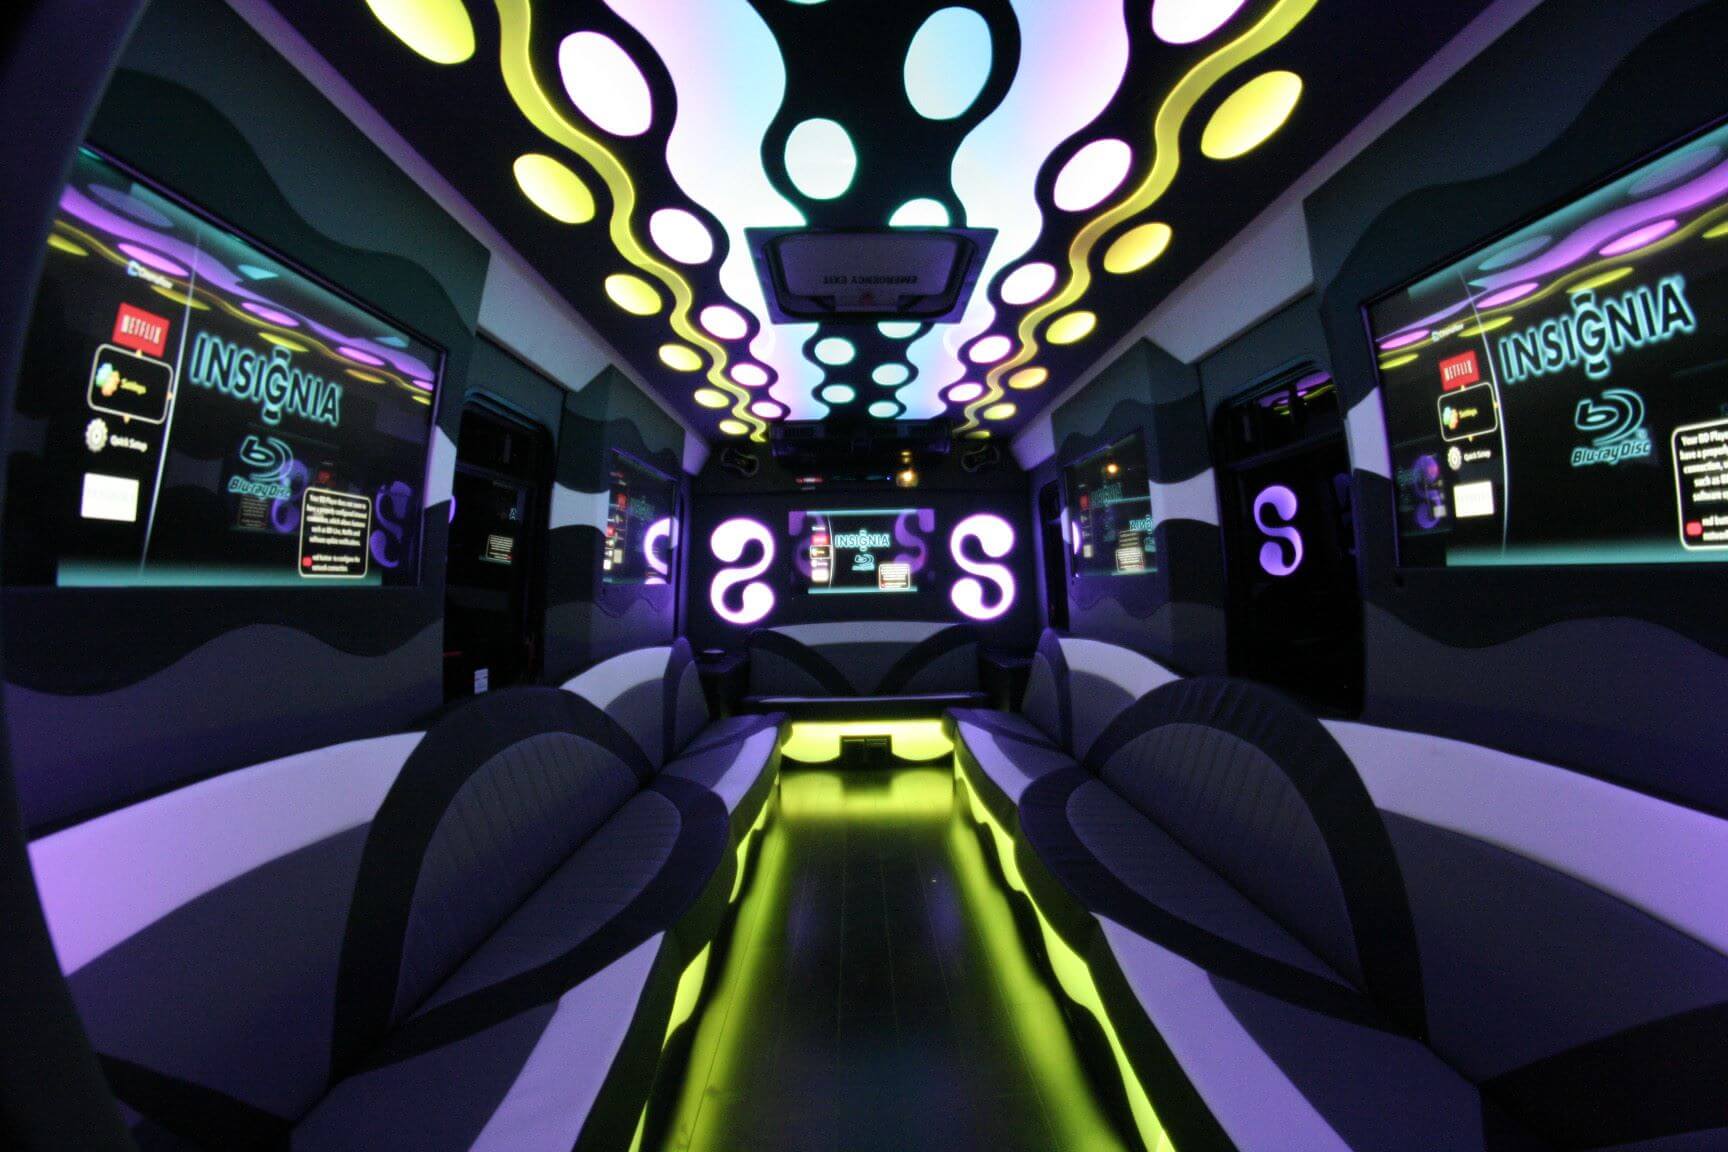 Party bus with built-in bar